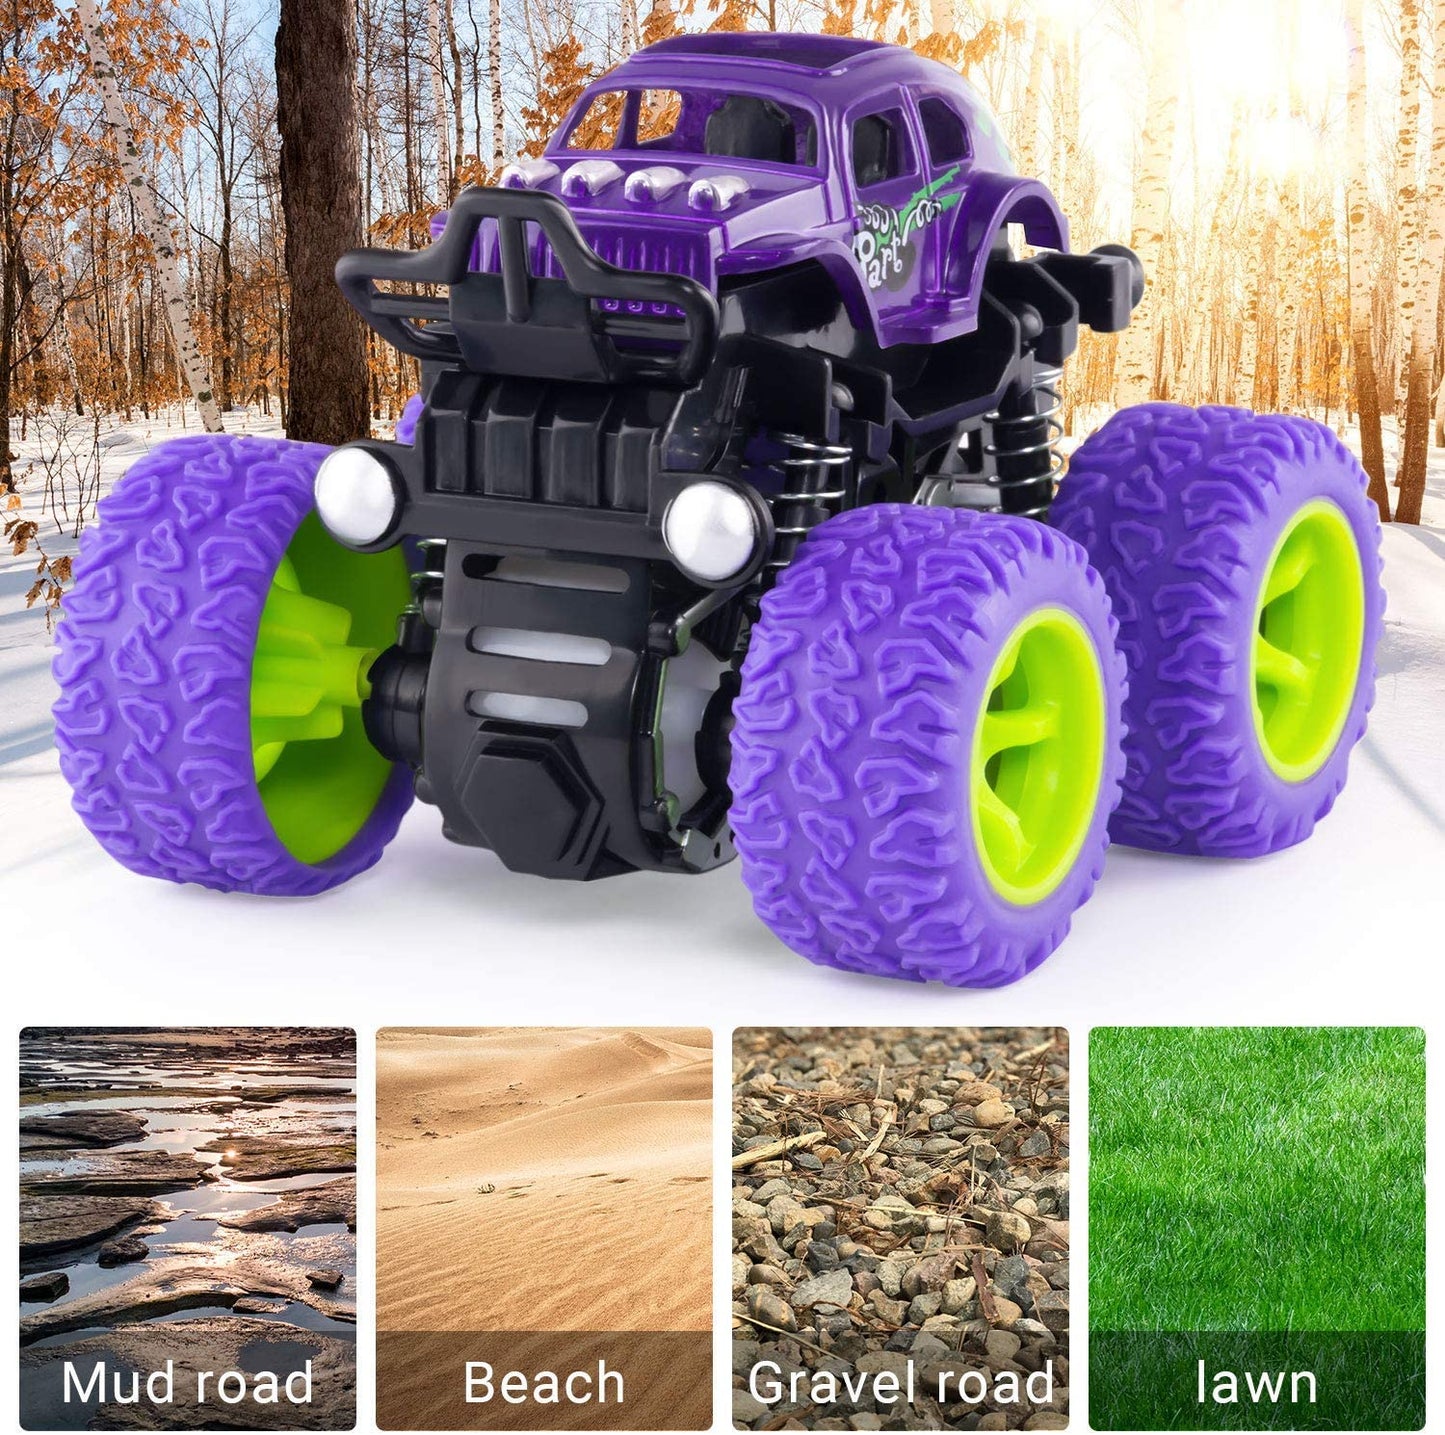 4 Pack Monster Truck Toys for Boys and Girls, Inertia Car Educational Toy Cars, Friction Powered Push and Go Toy Cars, Christmas Gift Birthday Party Supplies for Toddlers Kids (4 Color)